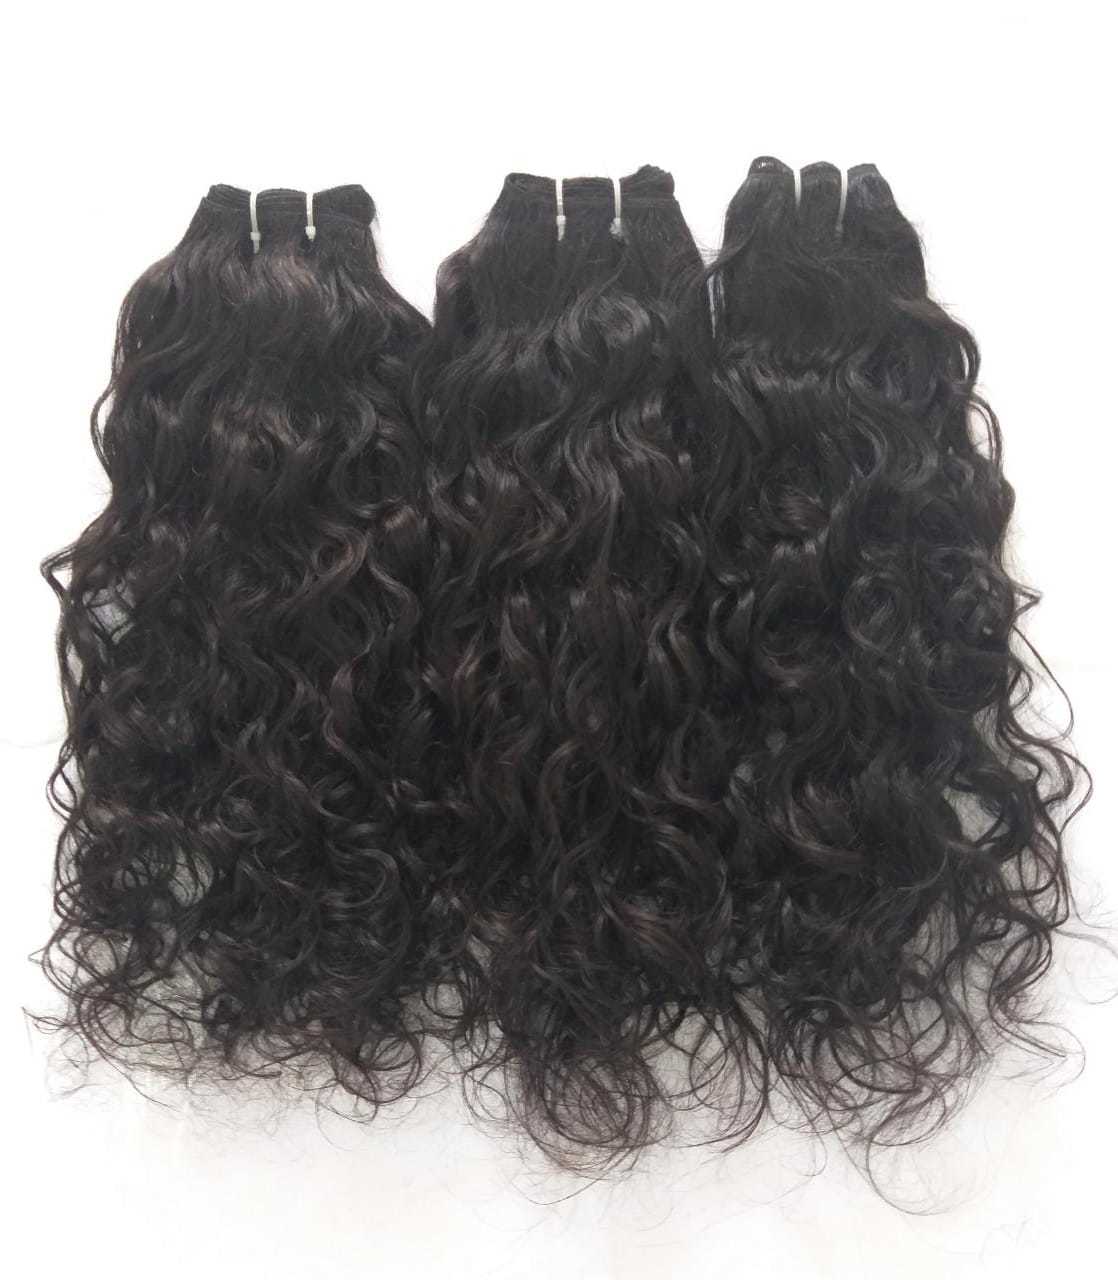 Wholesale Price Top Quality Virgin Human Hair ,remy Curly Human Hair